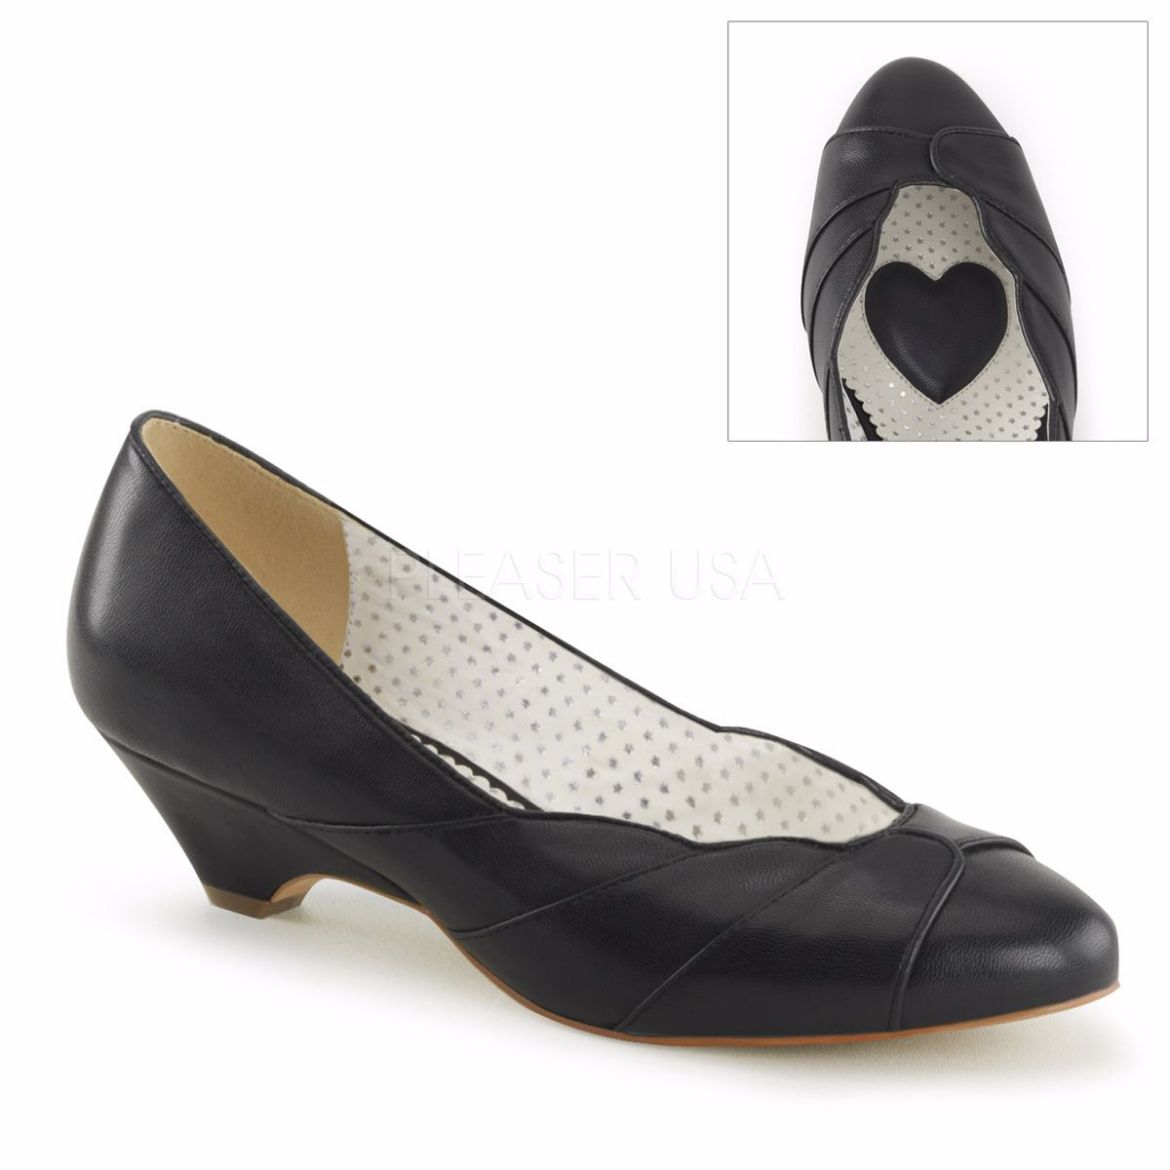 Product image of Pin Up Couture Lulu-05 Black Faux Leather, 1 1/2 inch (3.8 cm) Kitten Wedge Court Pump Shoes